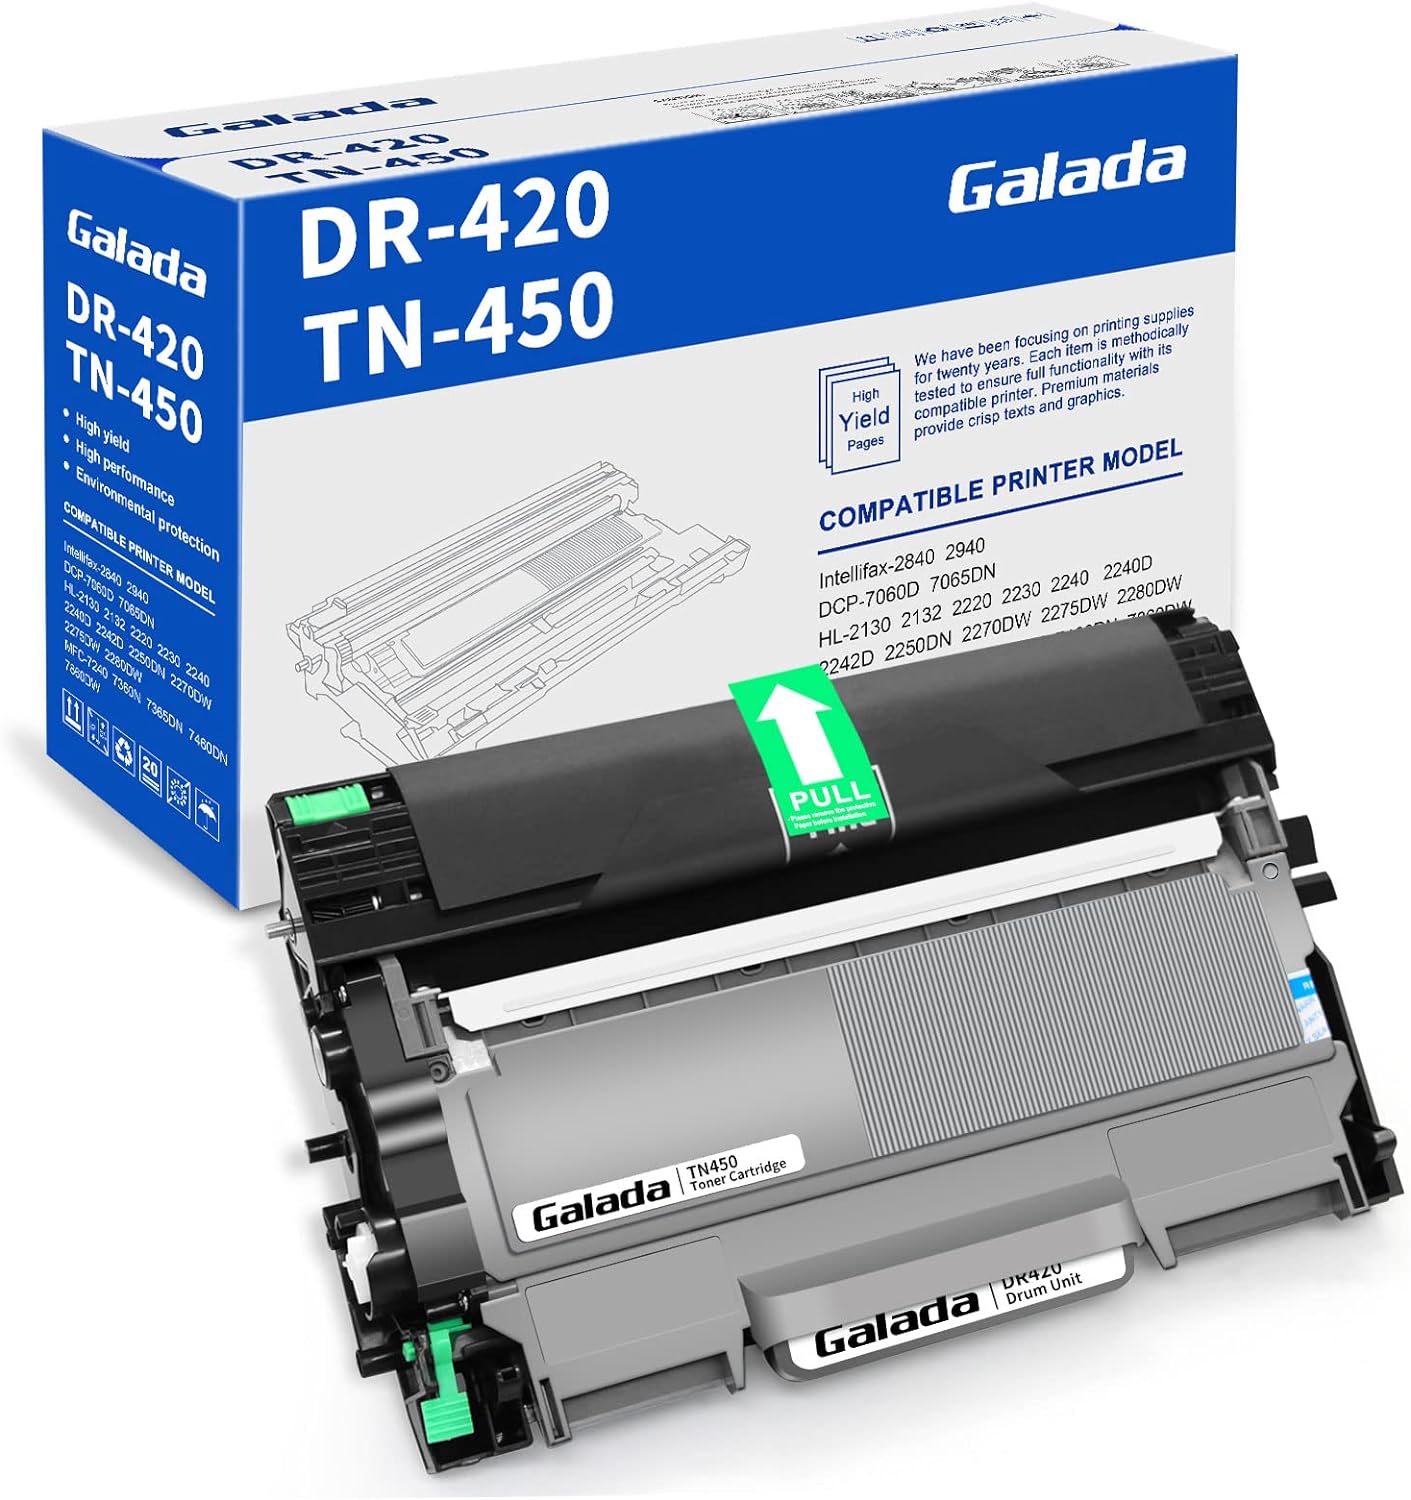 TN450 Toner DR420 Drum for Brother MFC-7460DN DCP-7065DN DCP-7060D HL-2230 Lot 